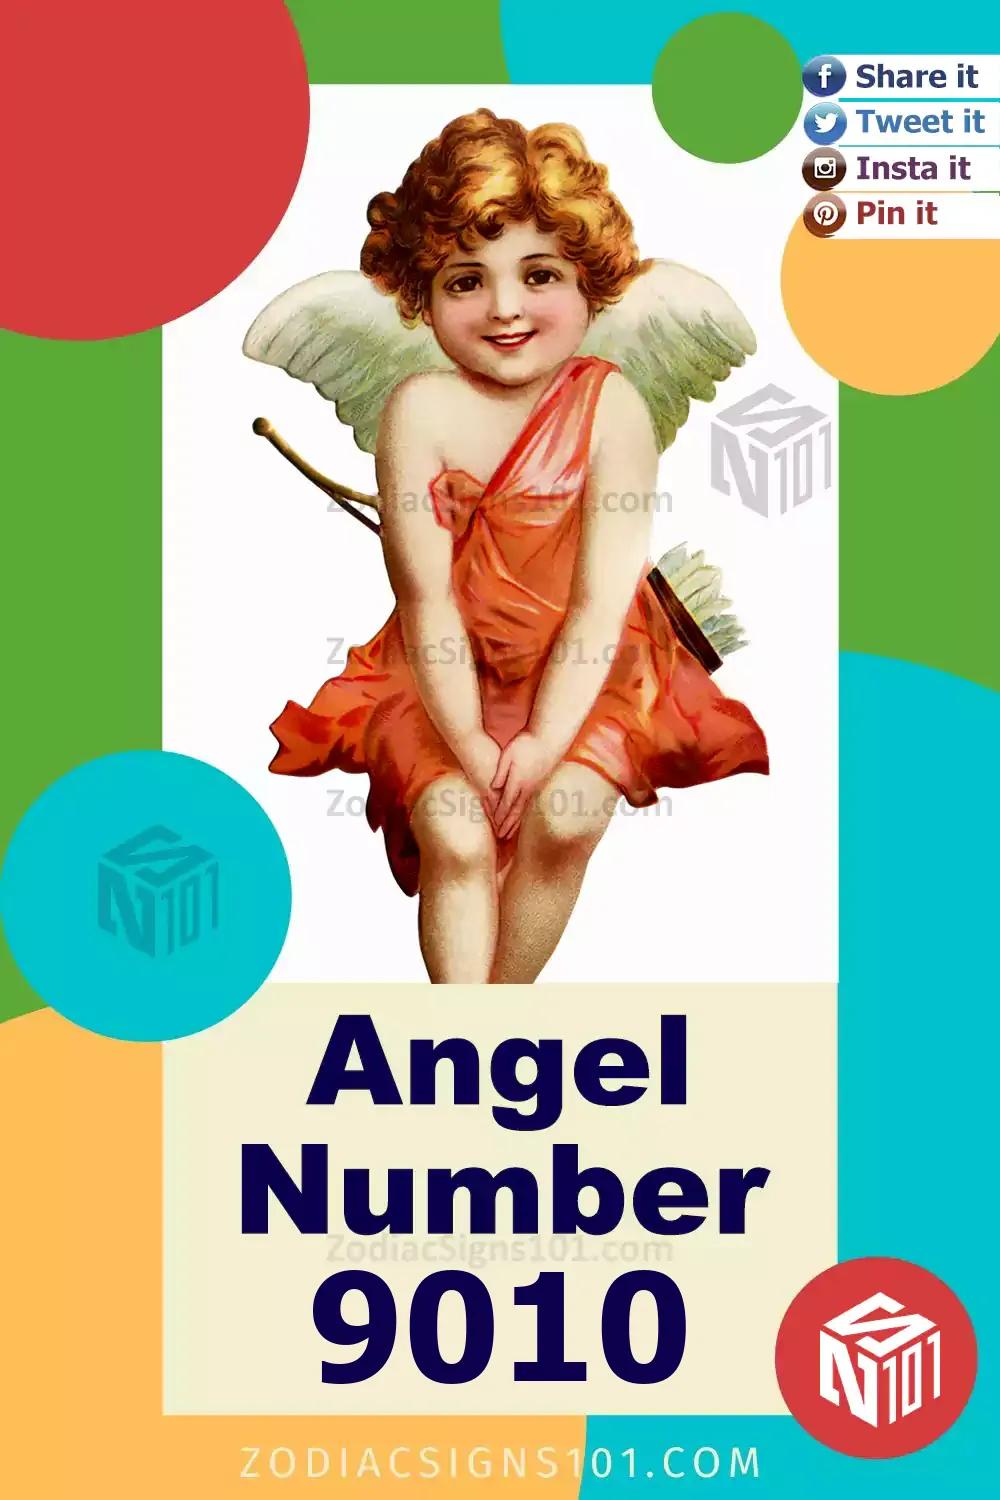 9010 Angel Number Meaning